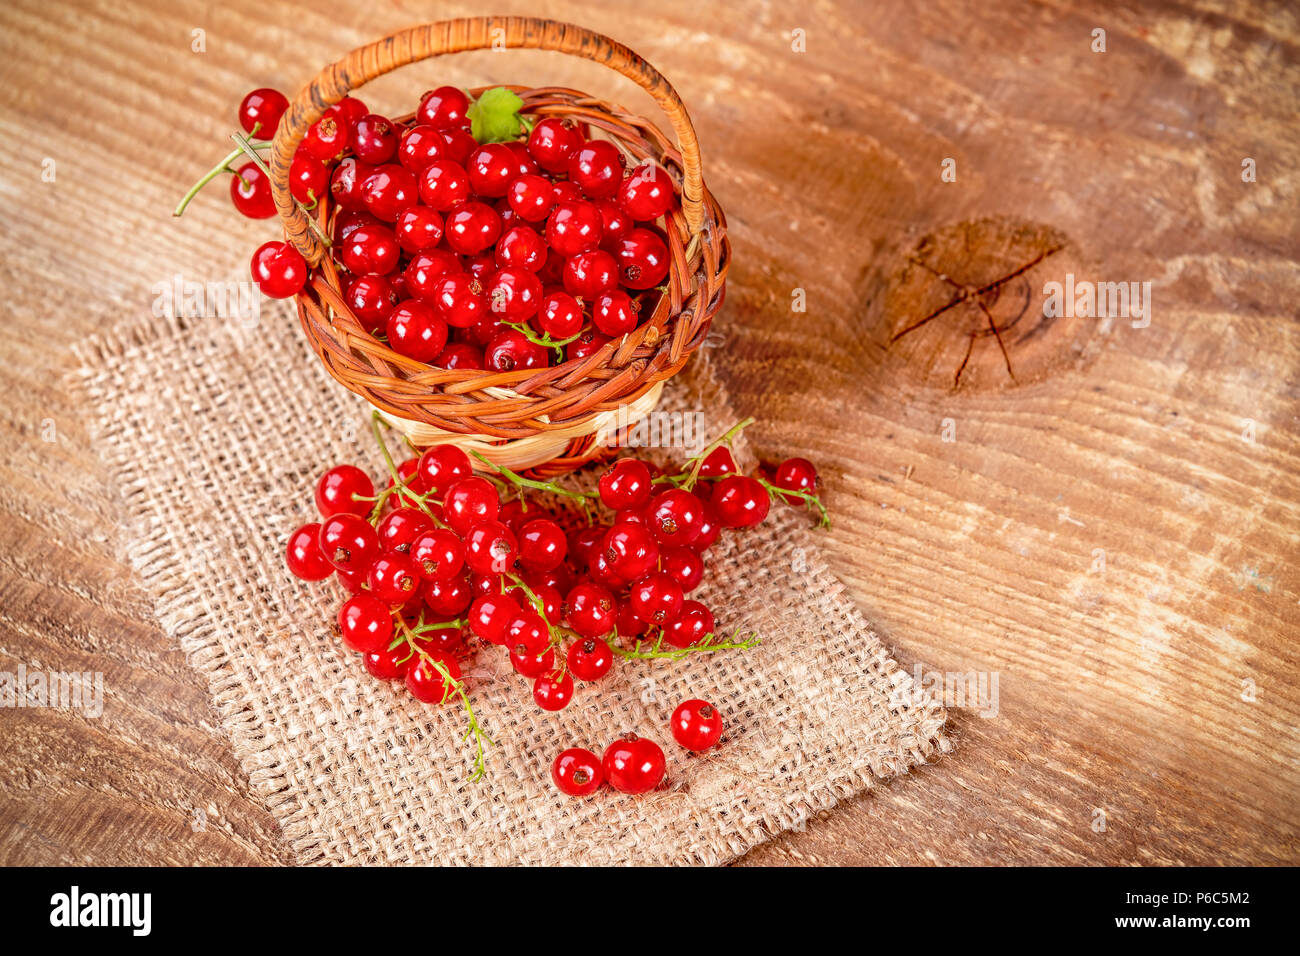 Redcurrant in basket on brown wooden table. Fresh fruits red currant on table. Stock Photo